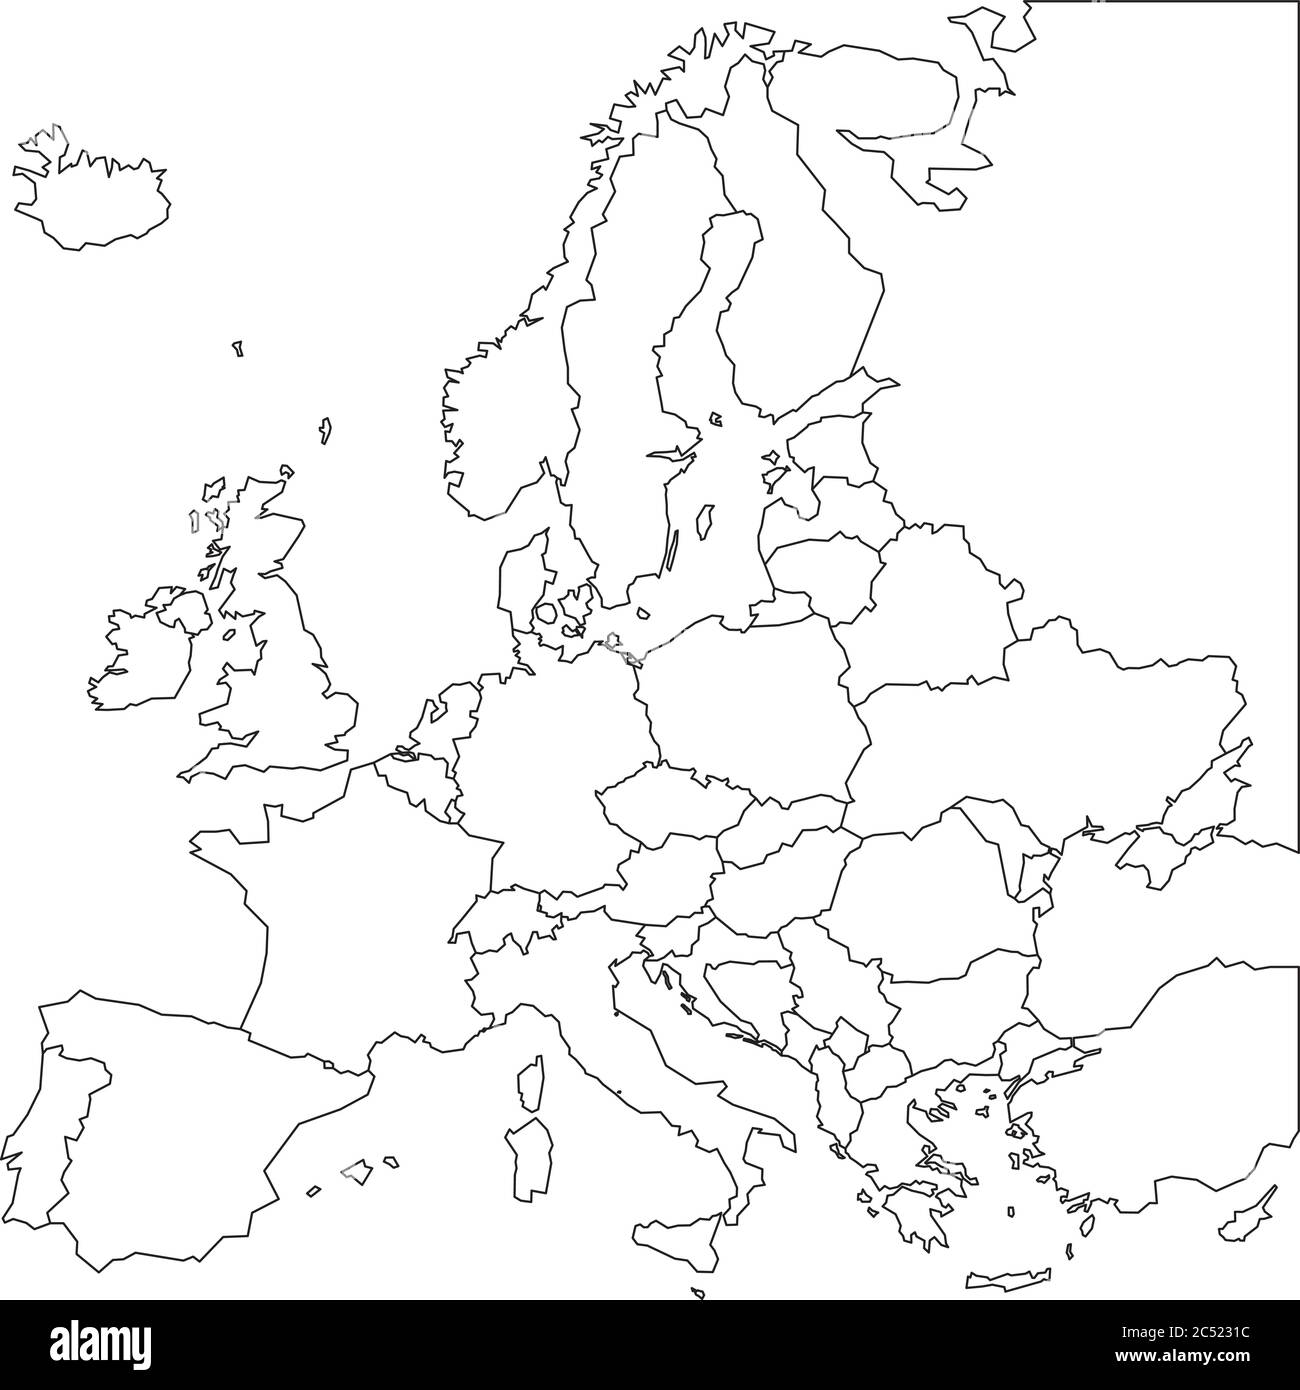 Blank outline map of Europe. Simplified wireframe map of black lined borders. Vector illustration. Stock Vector